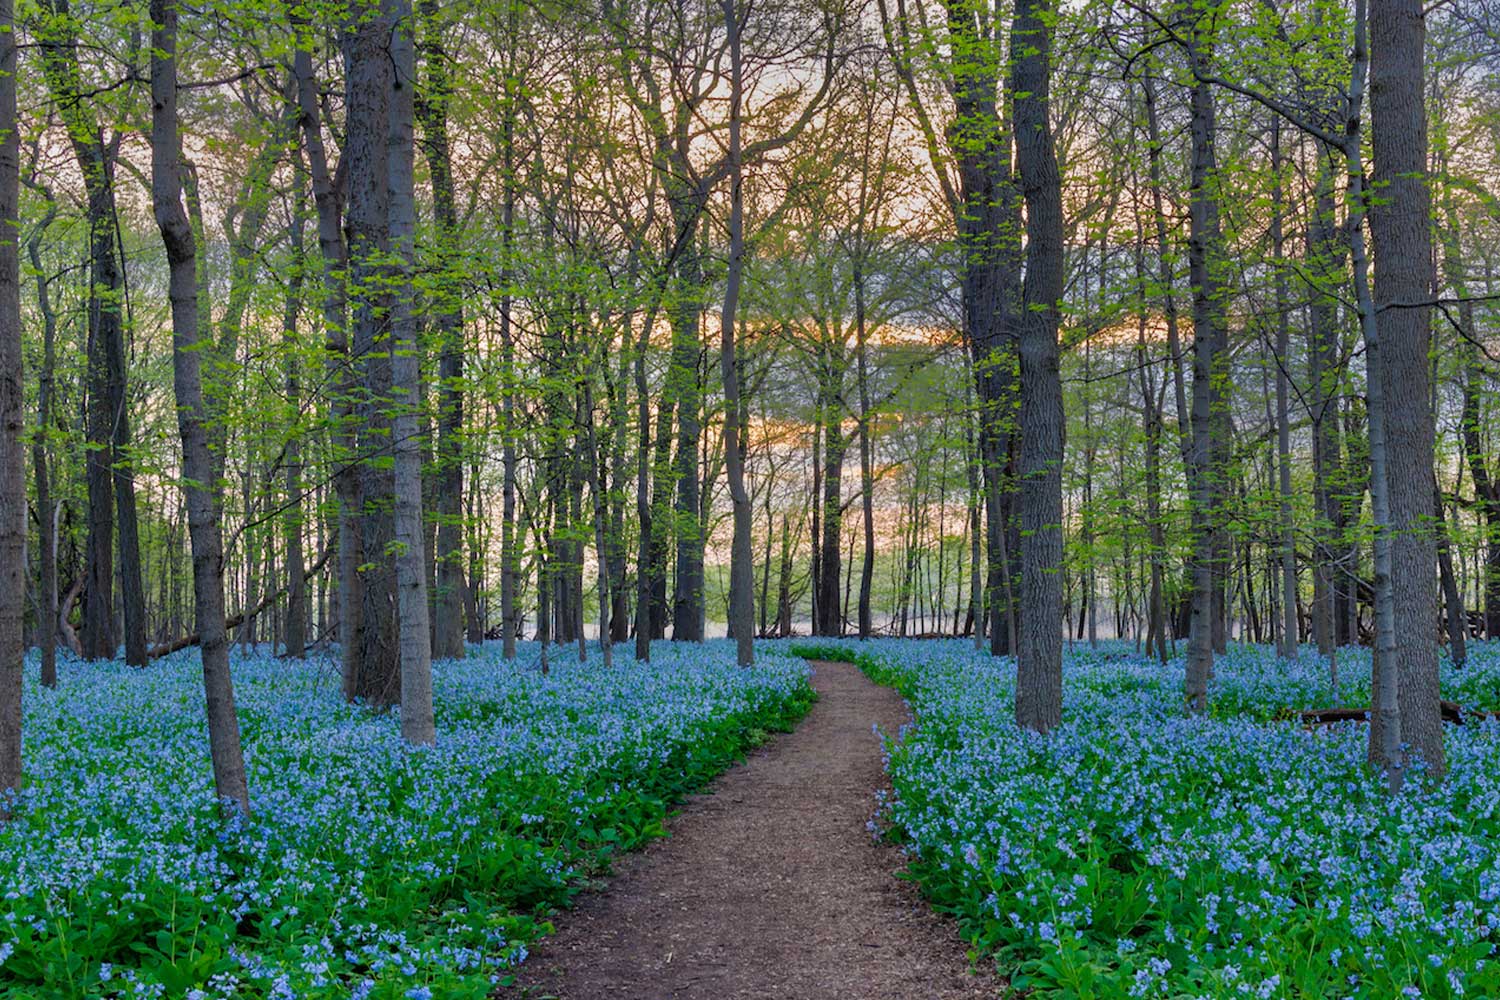 Trail lined with Virginia bluebell blooms and trees.